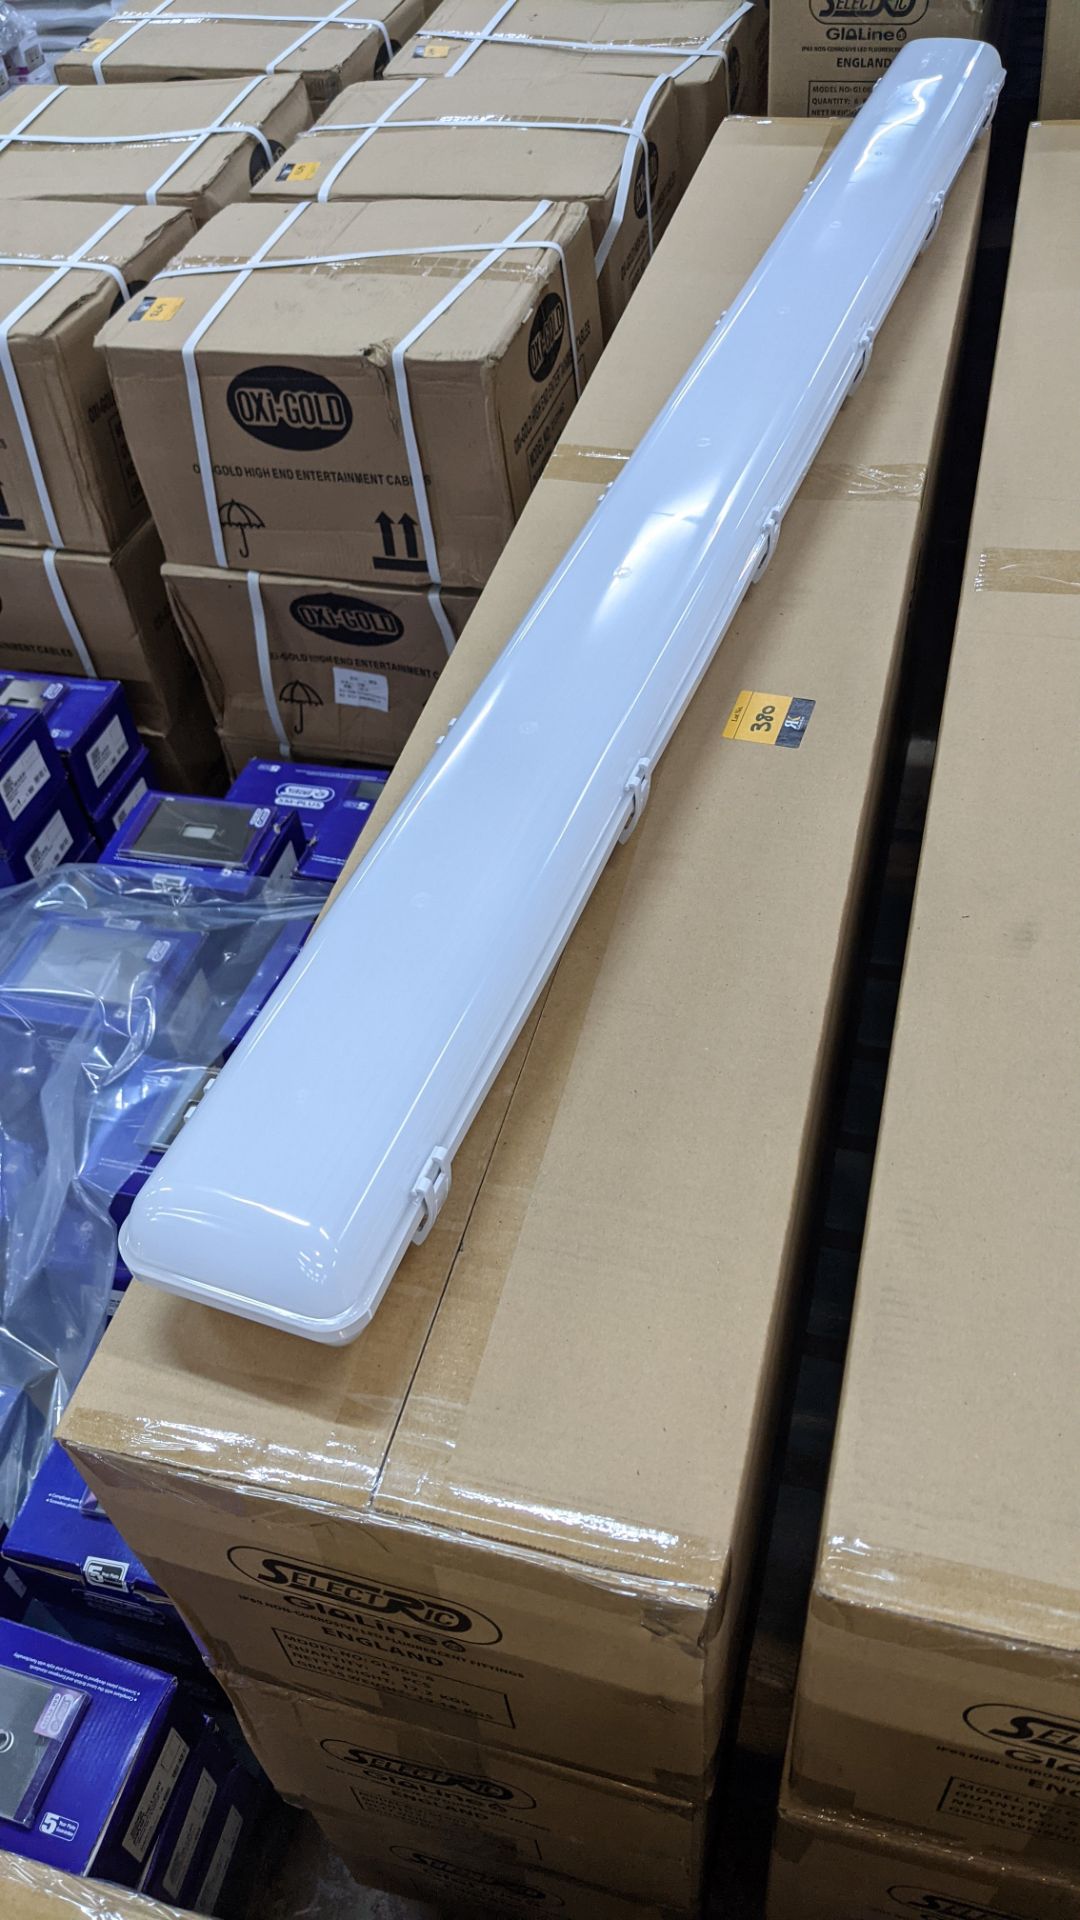 18 off IP65 non-corrosive LED fluorescent light fittings. Model GLO65-8, 5', twin LED 60W (with eme - Image 2 of 4